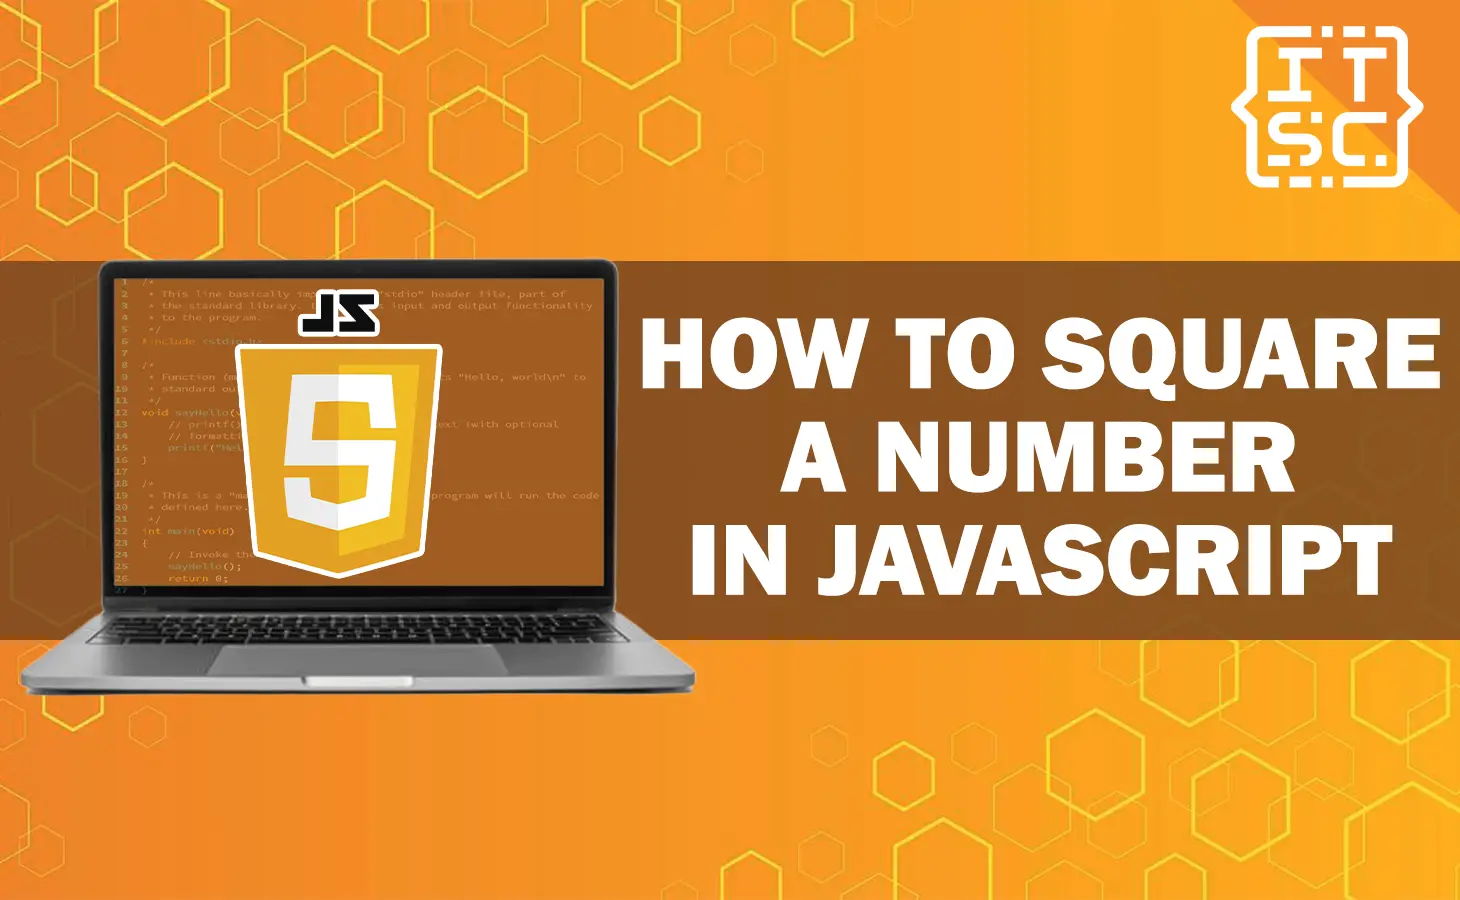 How to square a number in JavaScript